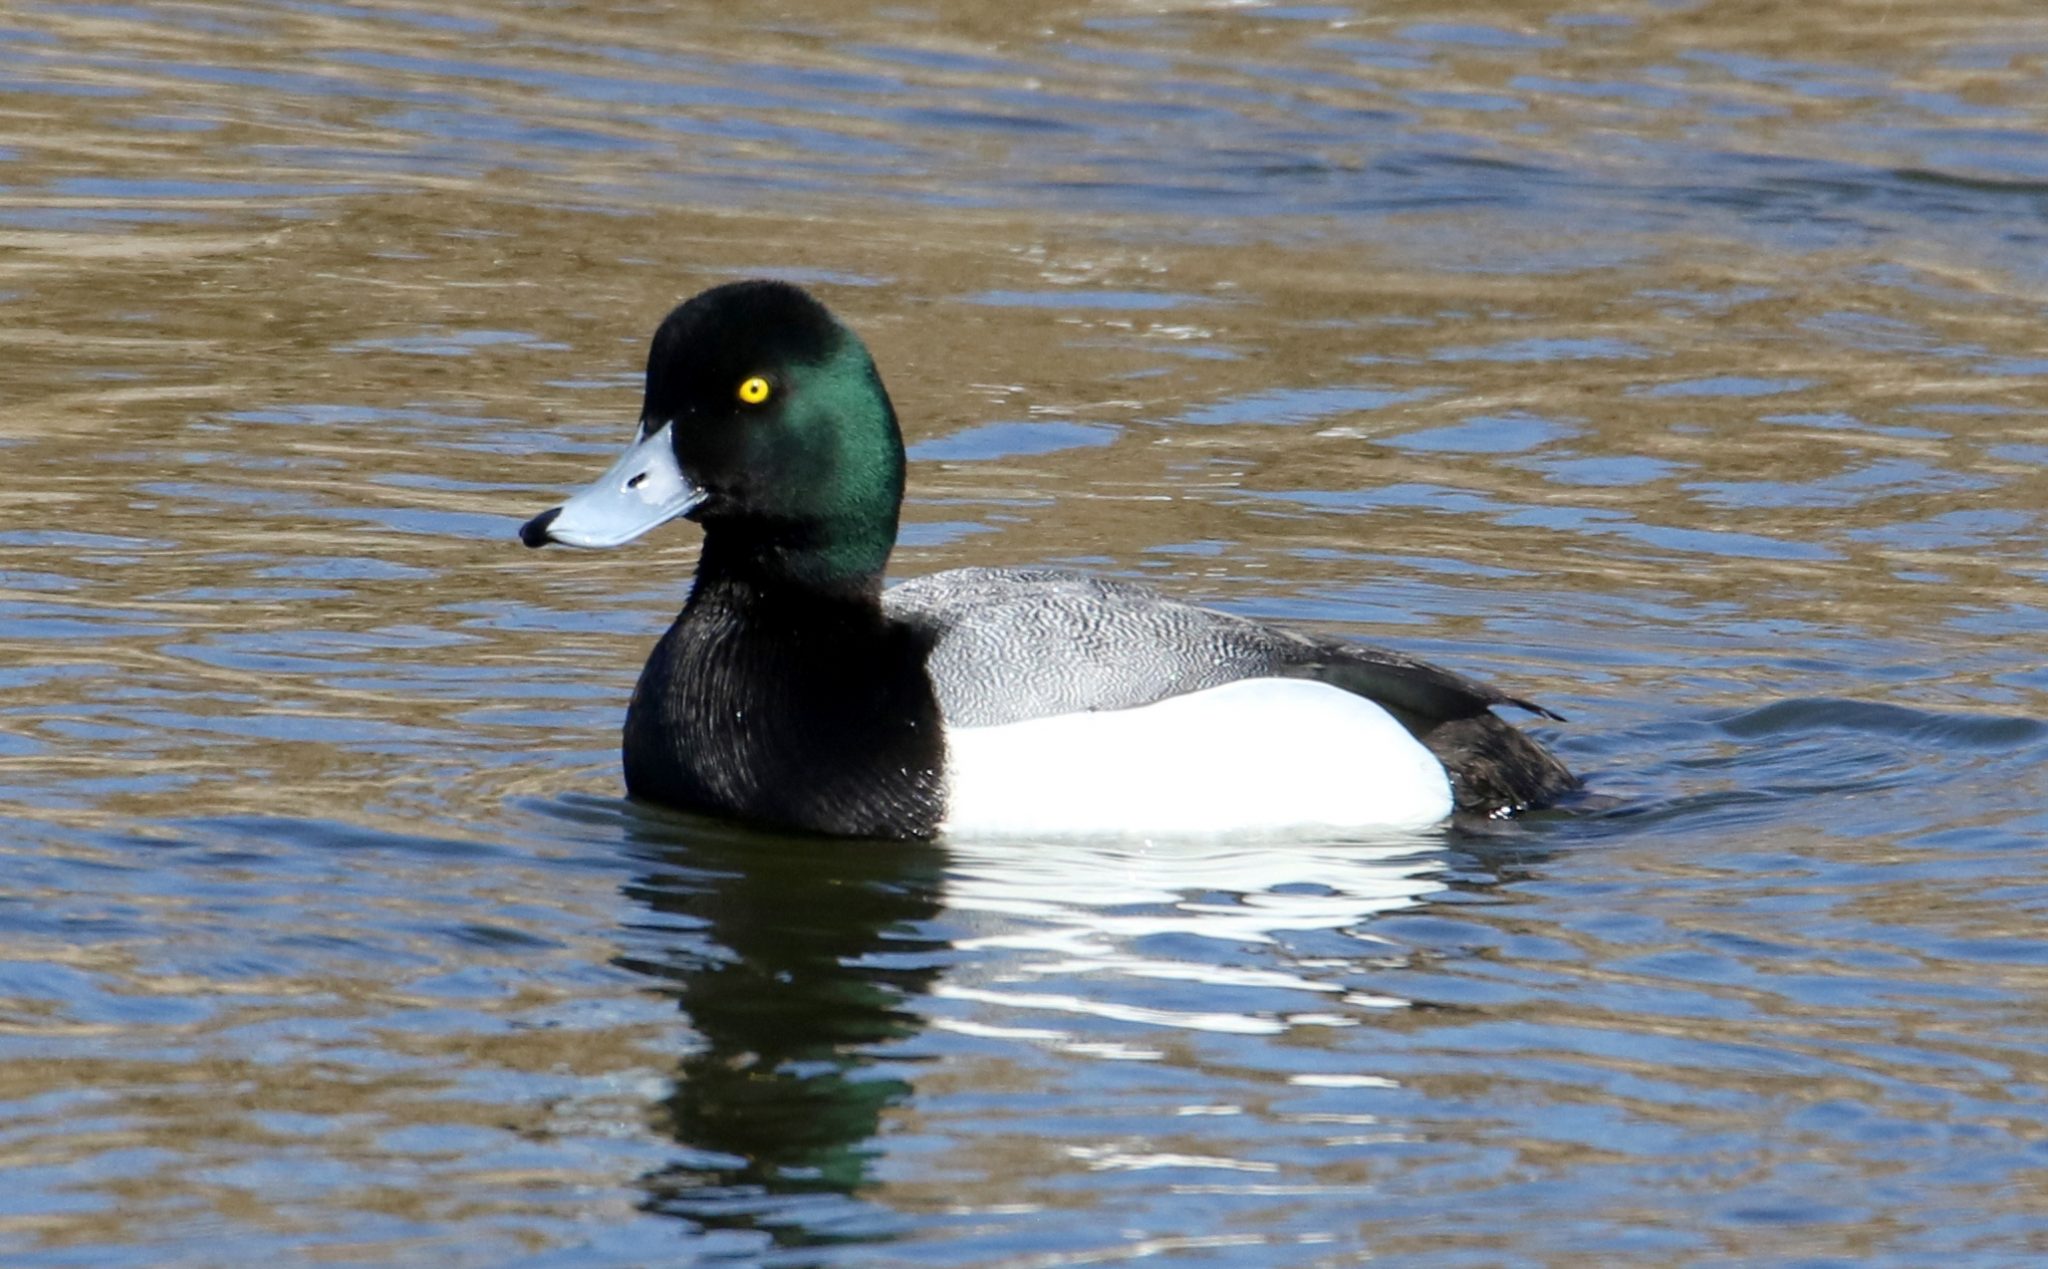 Greater Scaup in the Central Nebraska Public Power and Irrigation District canal downstream of Lake Ogallala, Keith Co, on 24 Mar 2018 by Boni Edwards